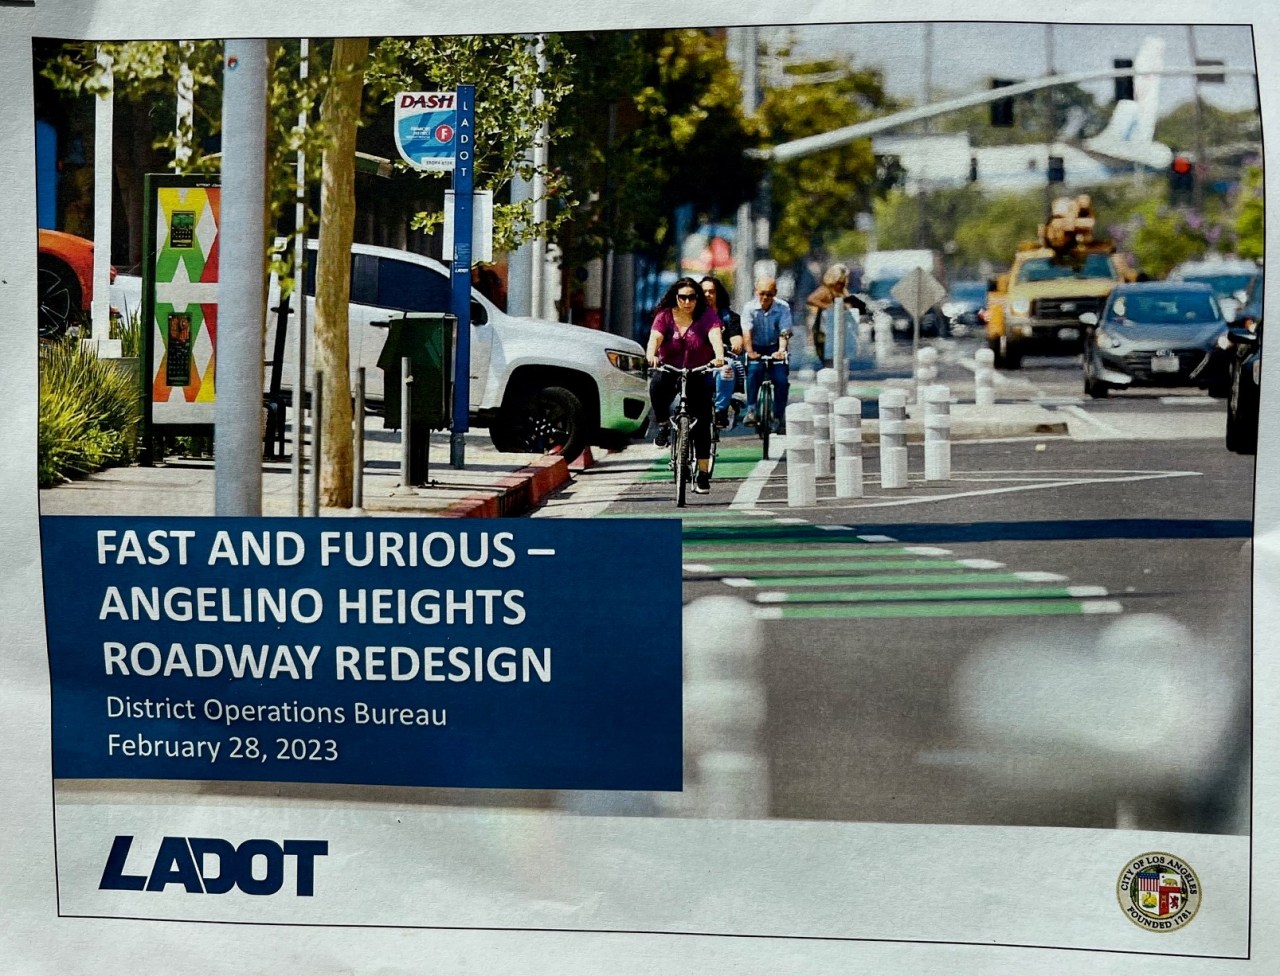 LADOT handout cover shows a protected bike lane, though no bike features are included in the proposed design